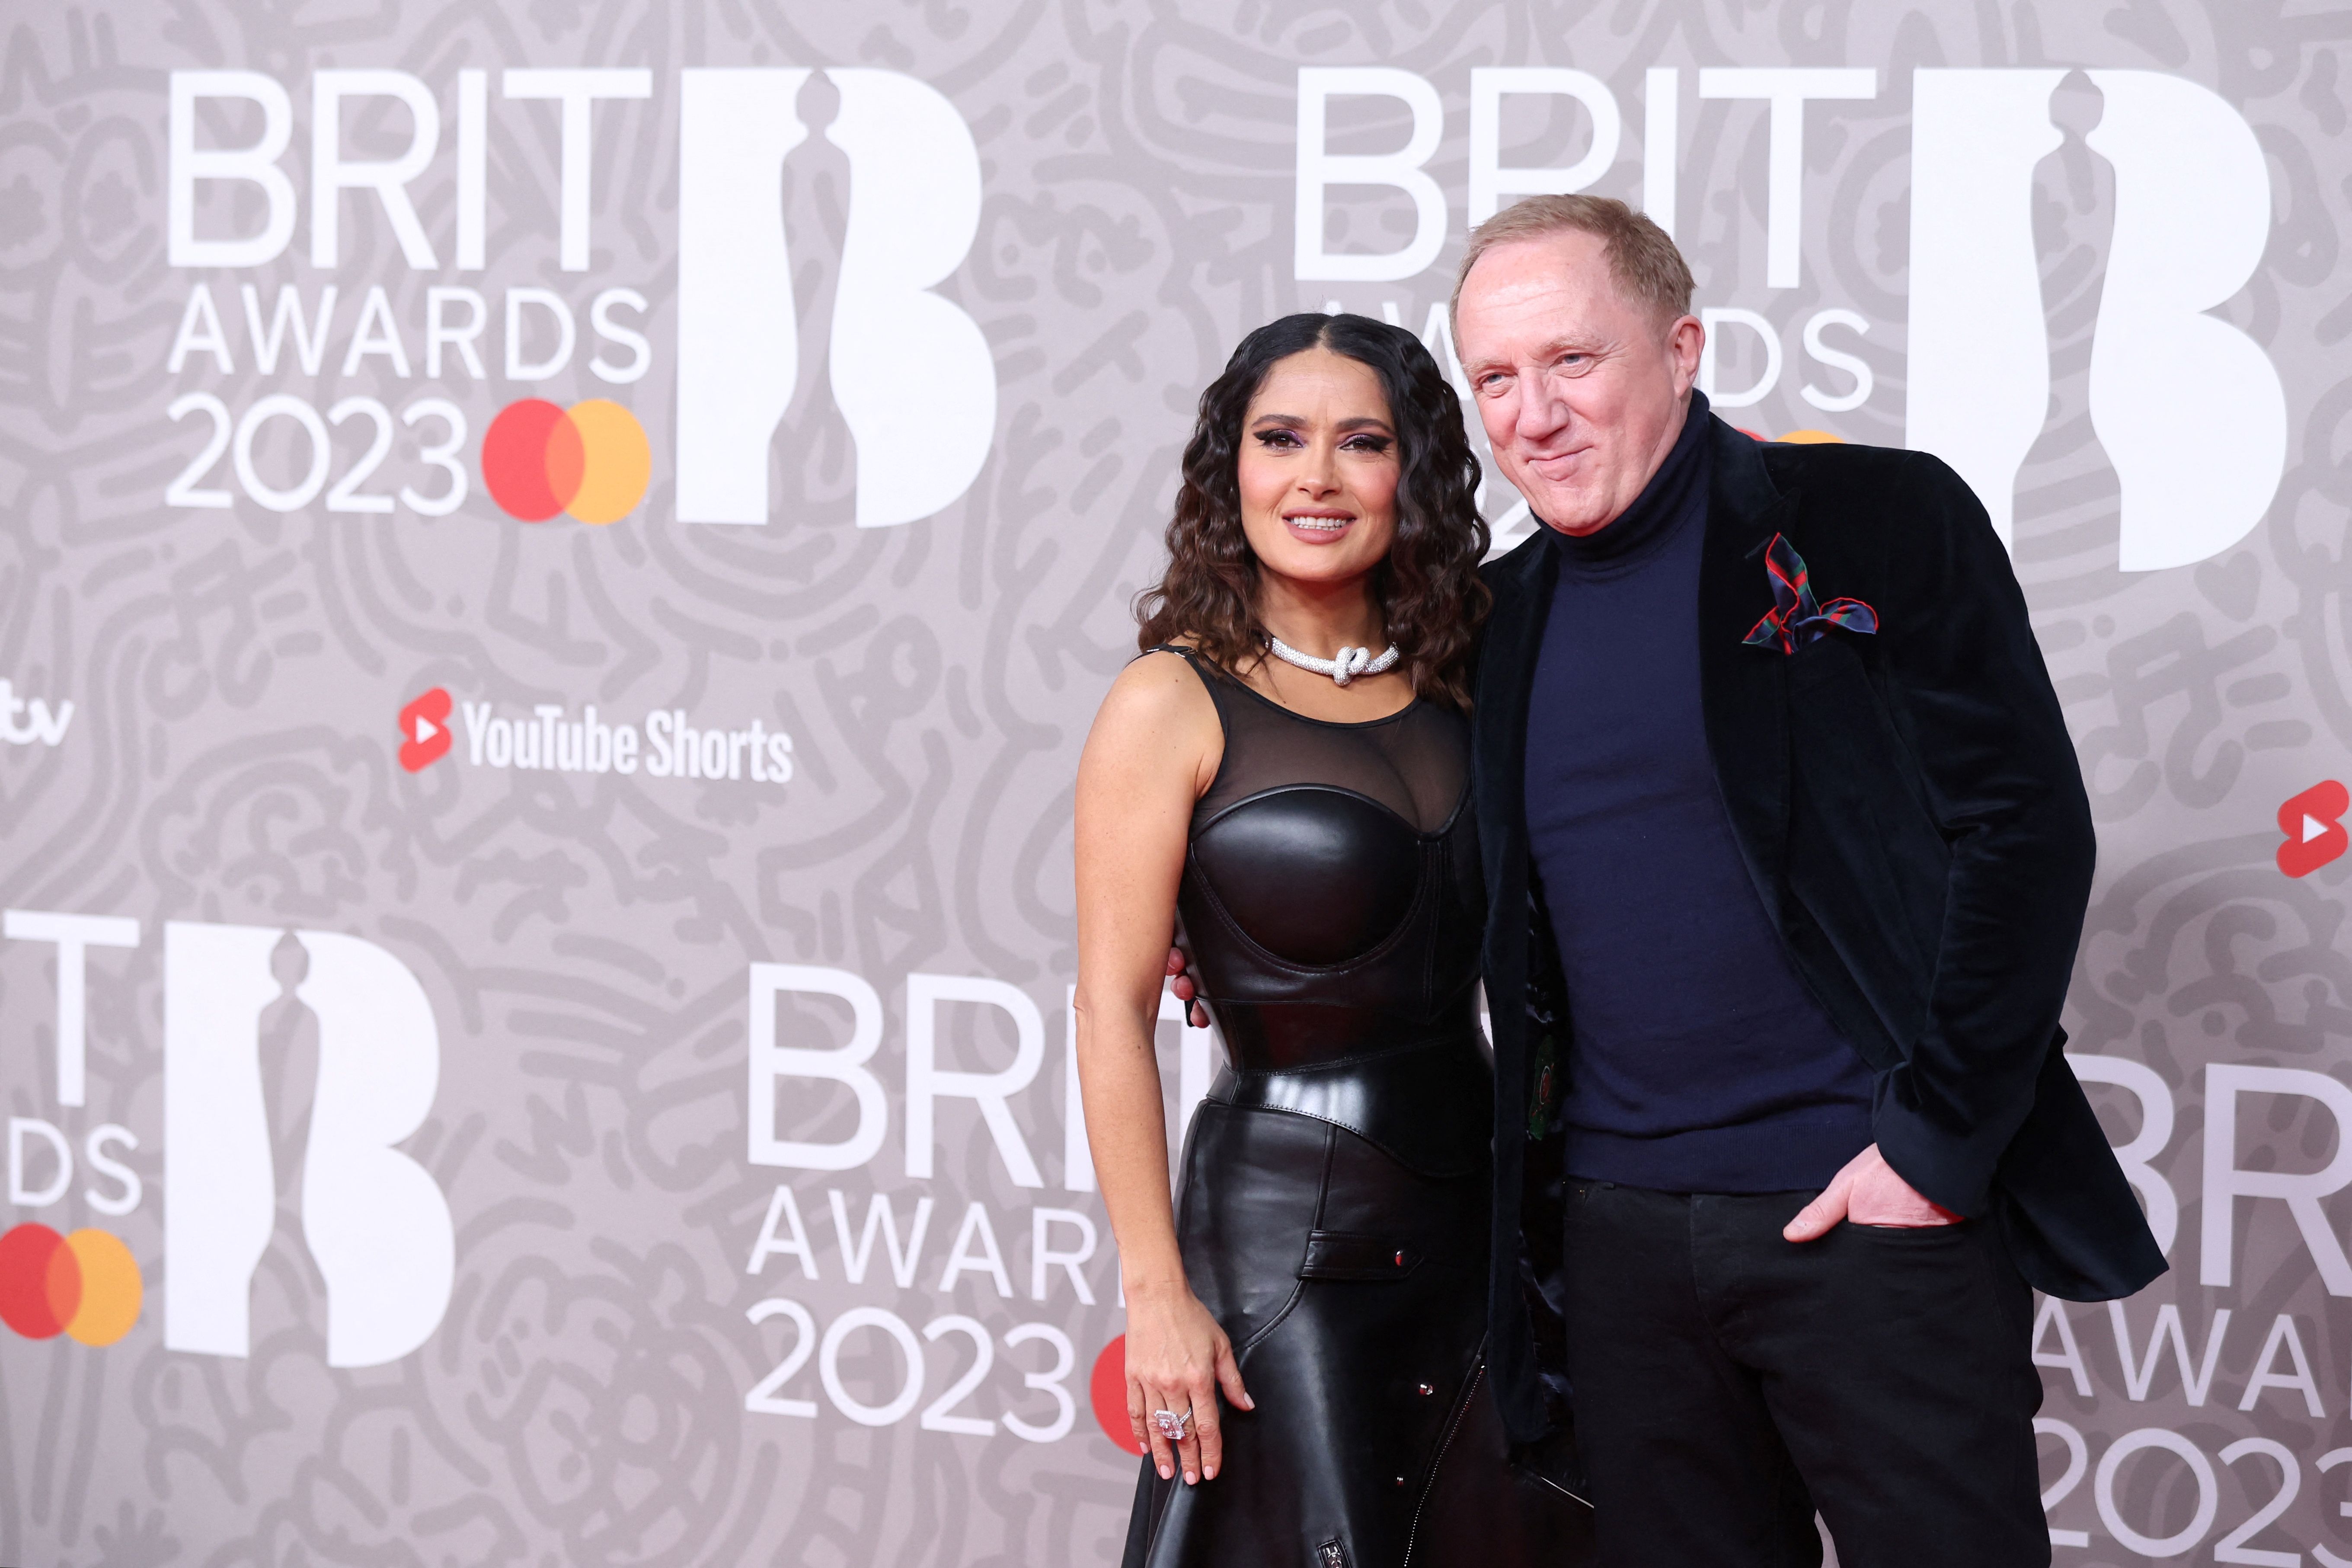 Salma Hayek and Francois-Henri Pinault at the Brit Awards in London, UK on February 11, 2023 | Source: Getty Images